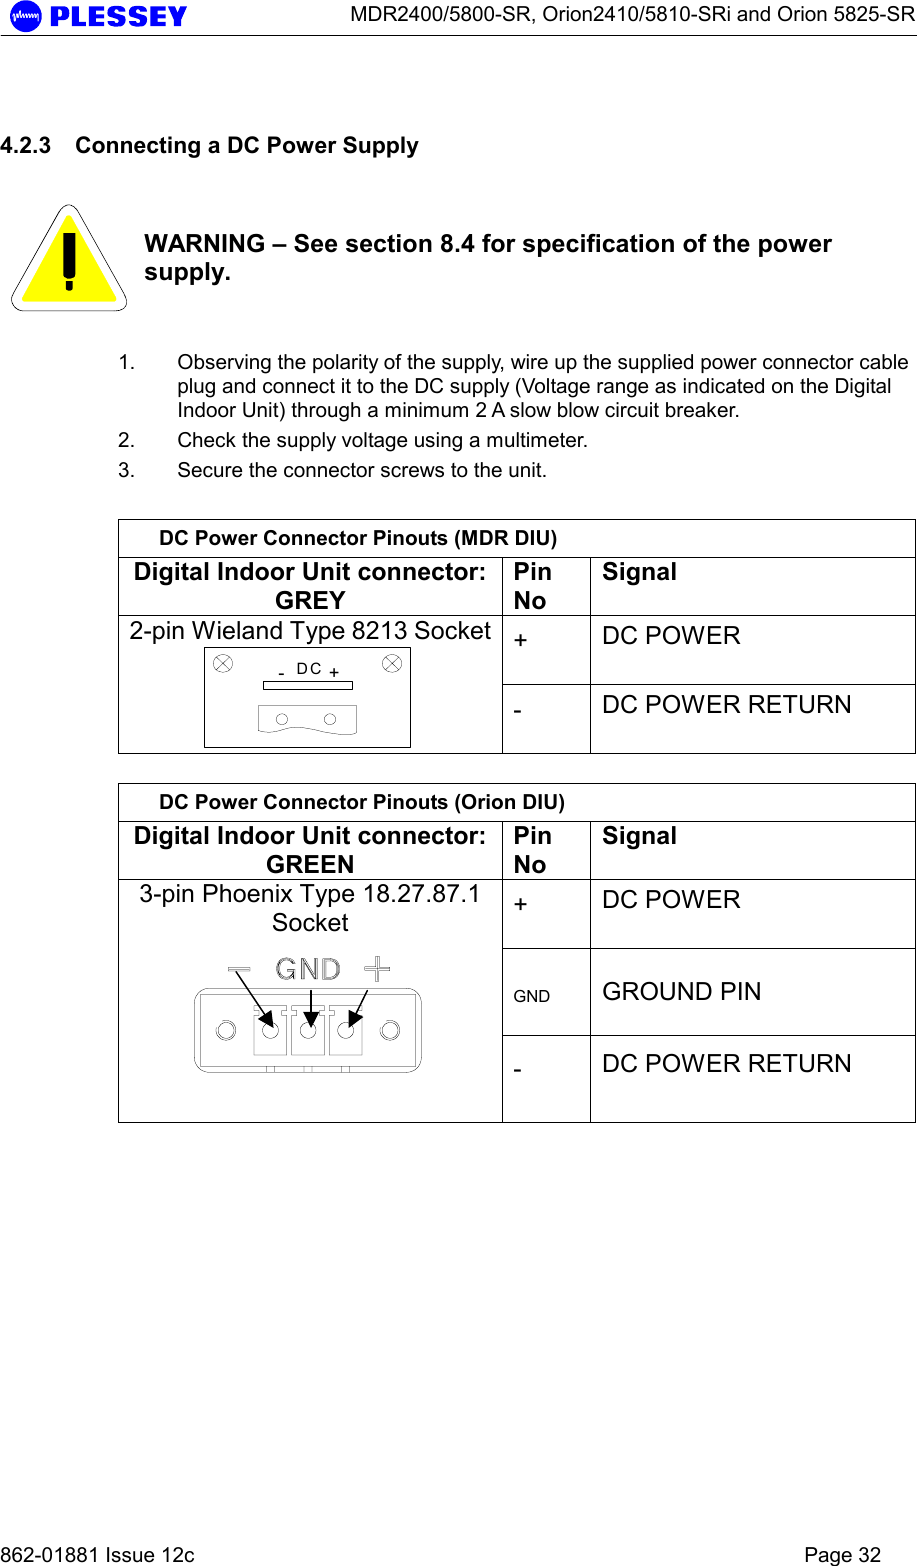      MDR2400/5800-SR, Orion2410/5810-SRi and Orion 5825-SR   862-01881 Issue 12c    Page 32 4.2.3  Connecting a DC Power Supply    WARNING – See section 8.4 for specification of the power supply.  1.  Observing the polarity of the supply, wire up the supplied power connector cable plug and connect it to the DC supply (Voltage range as indicated on the Digital Indoor Unit) through a minimum 2 A slow blow circuit breaker. 2.  Check the supply voltage using a multimeter. 3.  Secure the connector screws to the unit.  DC Power Connector Pinouts (MDR DIU) Digital Indoor Unit connector: GREY Pin No Signal +  DC POWER  2-pin Wieland Type 8213 Socket-+DC -  DC POWER RETURN   DC Power Connector Pinouts (Orion DIU) Digital Indoor Unit connector: GREEN Pin No Signal +  DC POWER  GND  GROUND PIN 3-pin Phoenix Type 18.27.87.1 Socket  -  DC POWER RETURN   